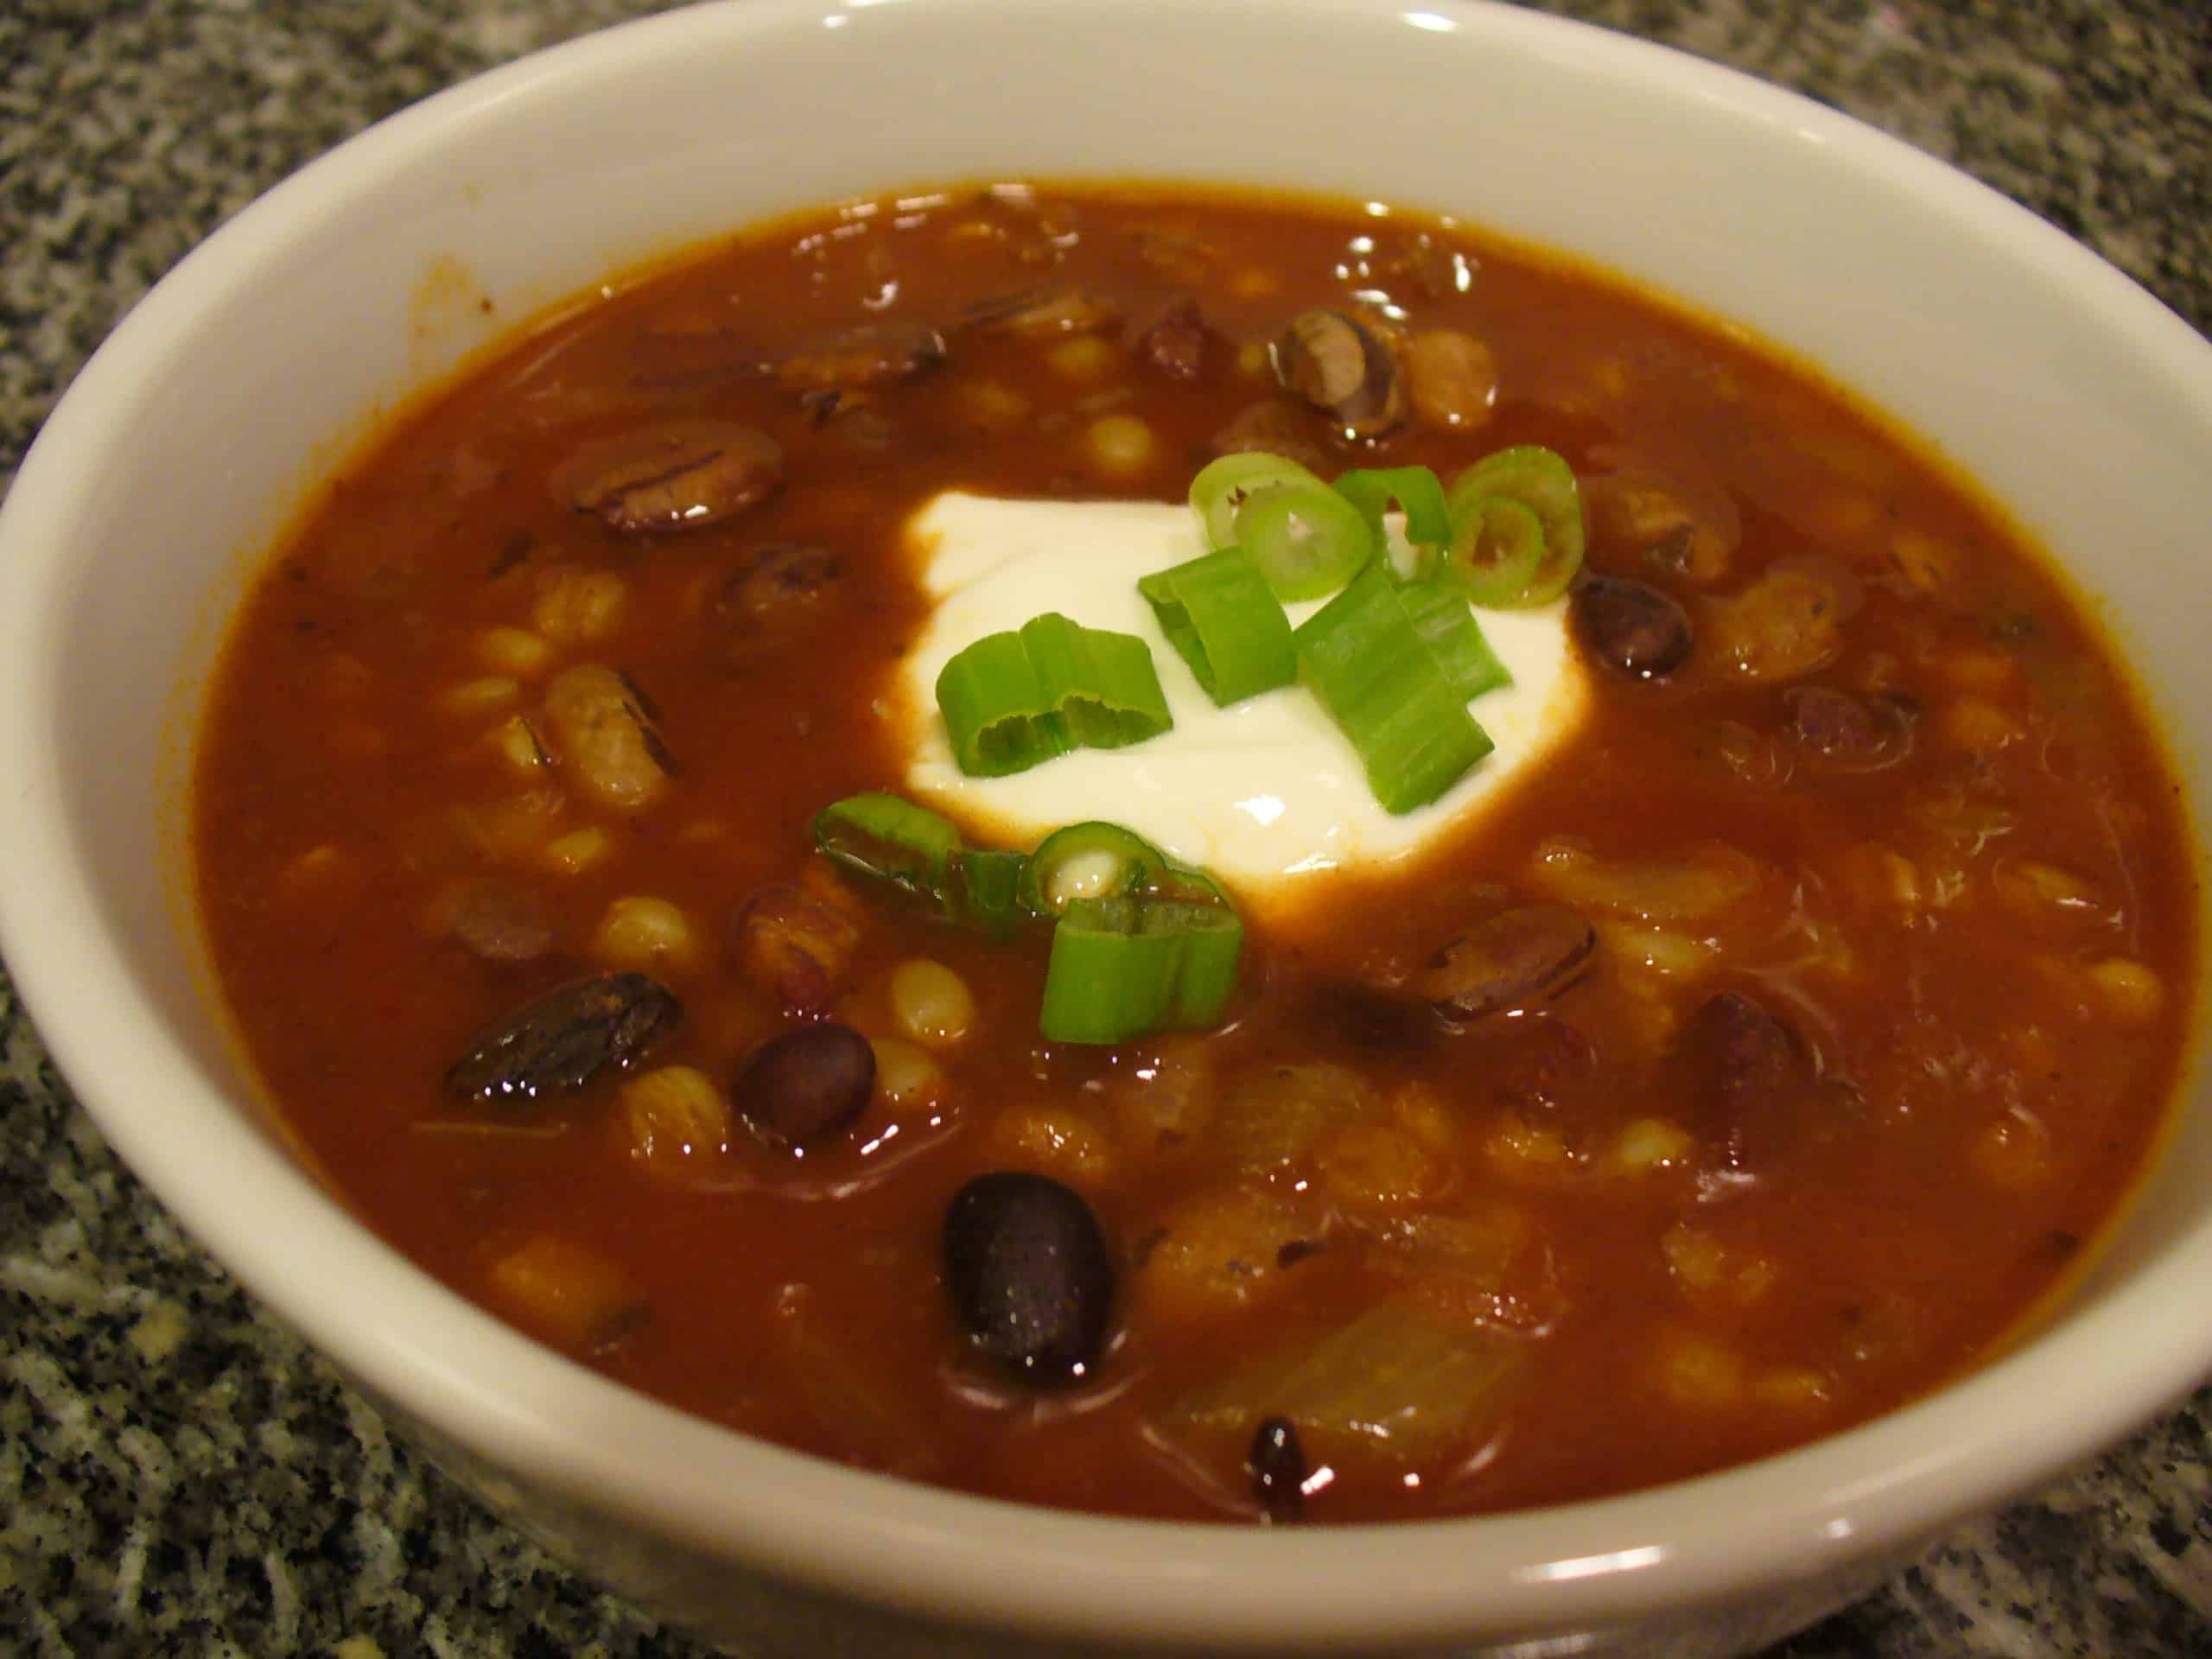 Hearty bowl of chili photo by Carole Cancler